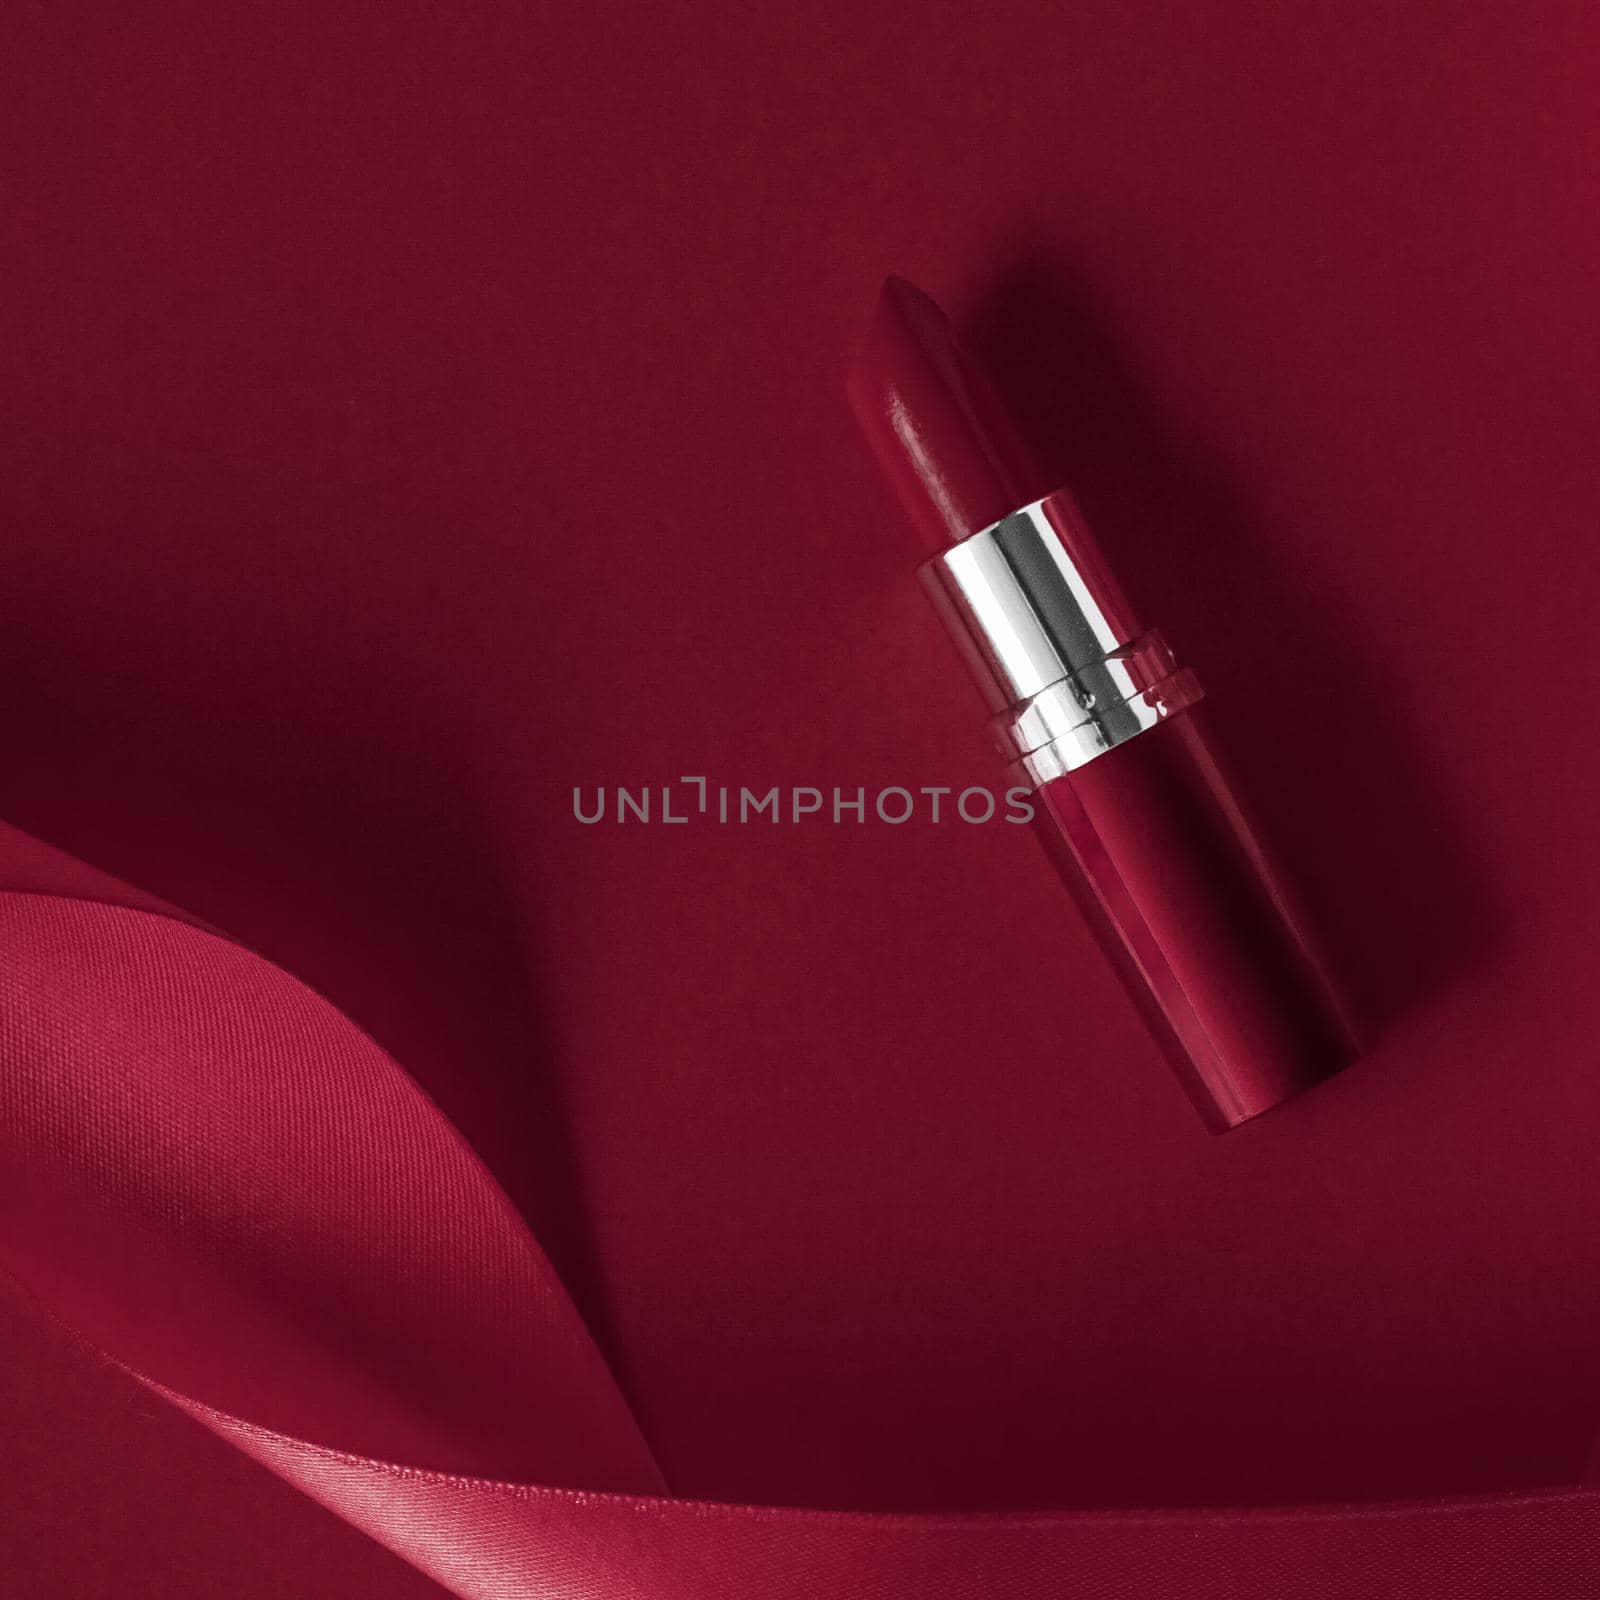 Cosmetic branding, glamour lip gloss and shopping sale concept - Luxury lipstick and silk ribbon on maroon holiday background, make-up and cosmetics flatlay for beauty brand product design